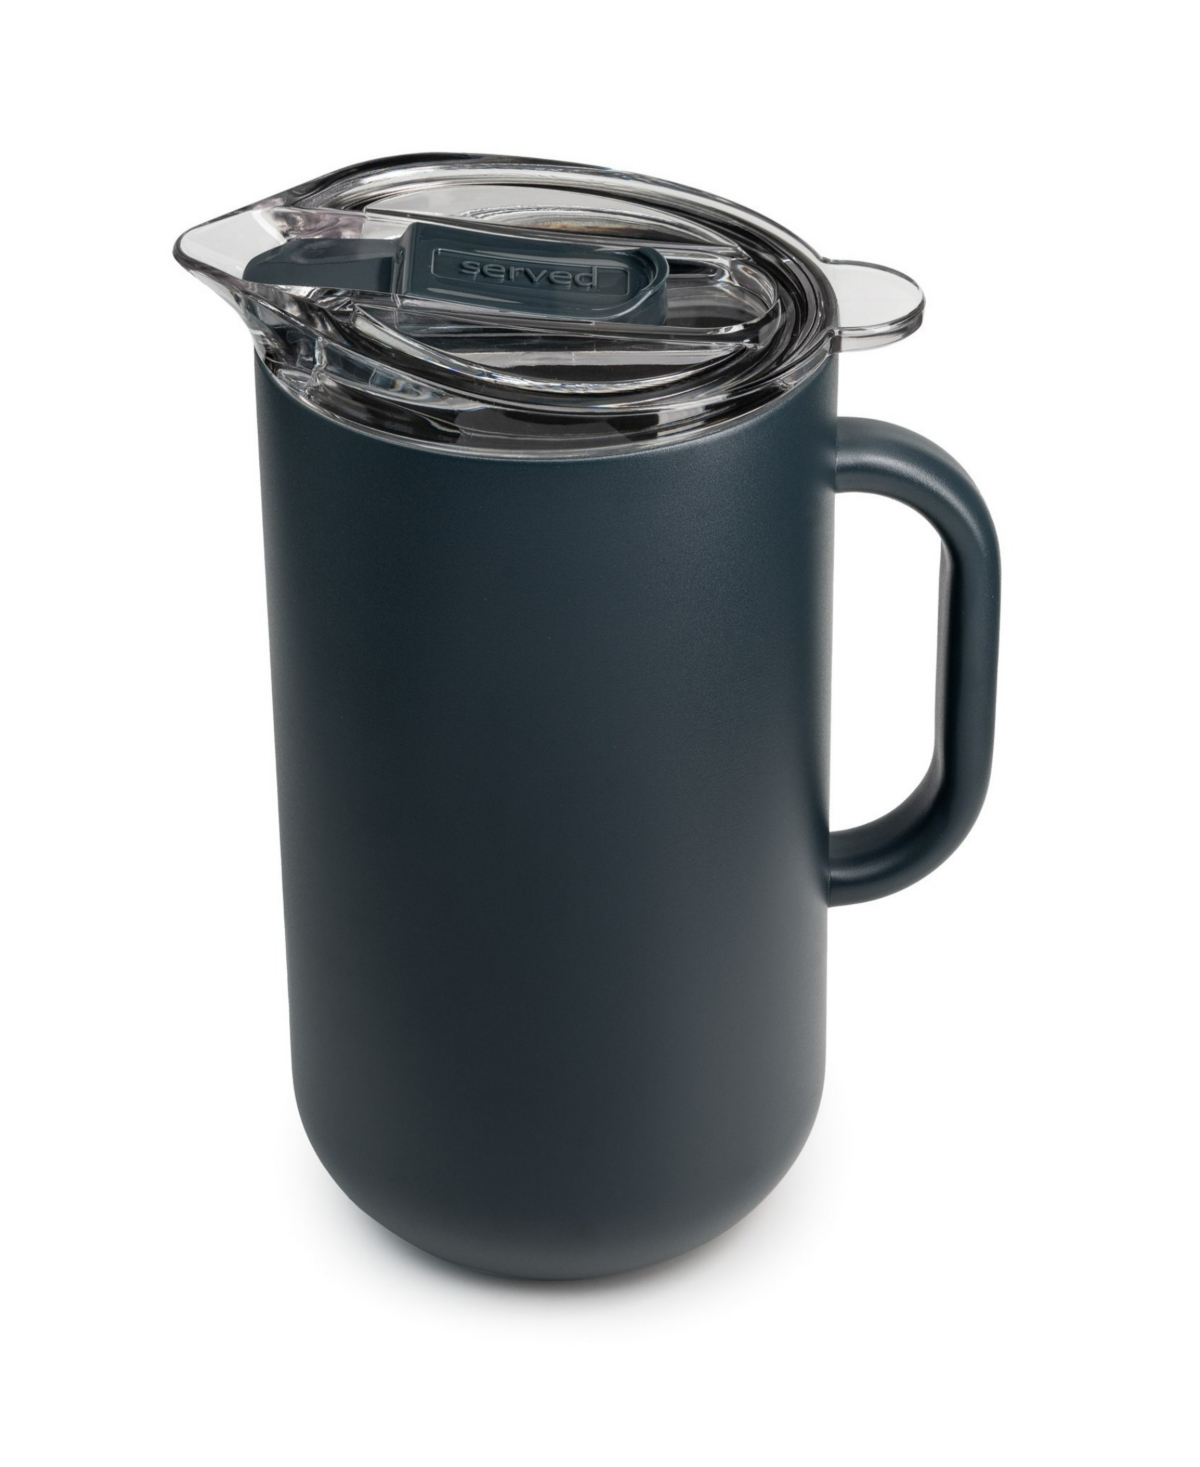 Served Vacuum-insulated Double-walled Copper-lined Stainless Steel Pitcher, 2 Liter In Caviar